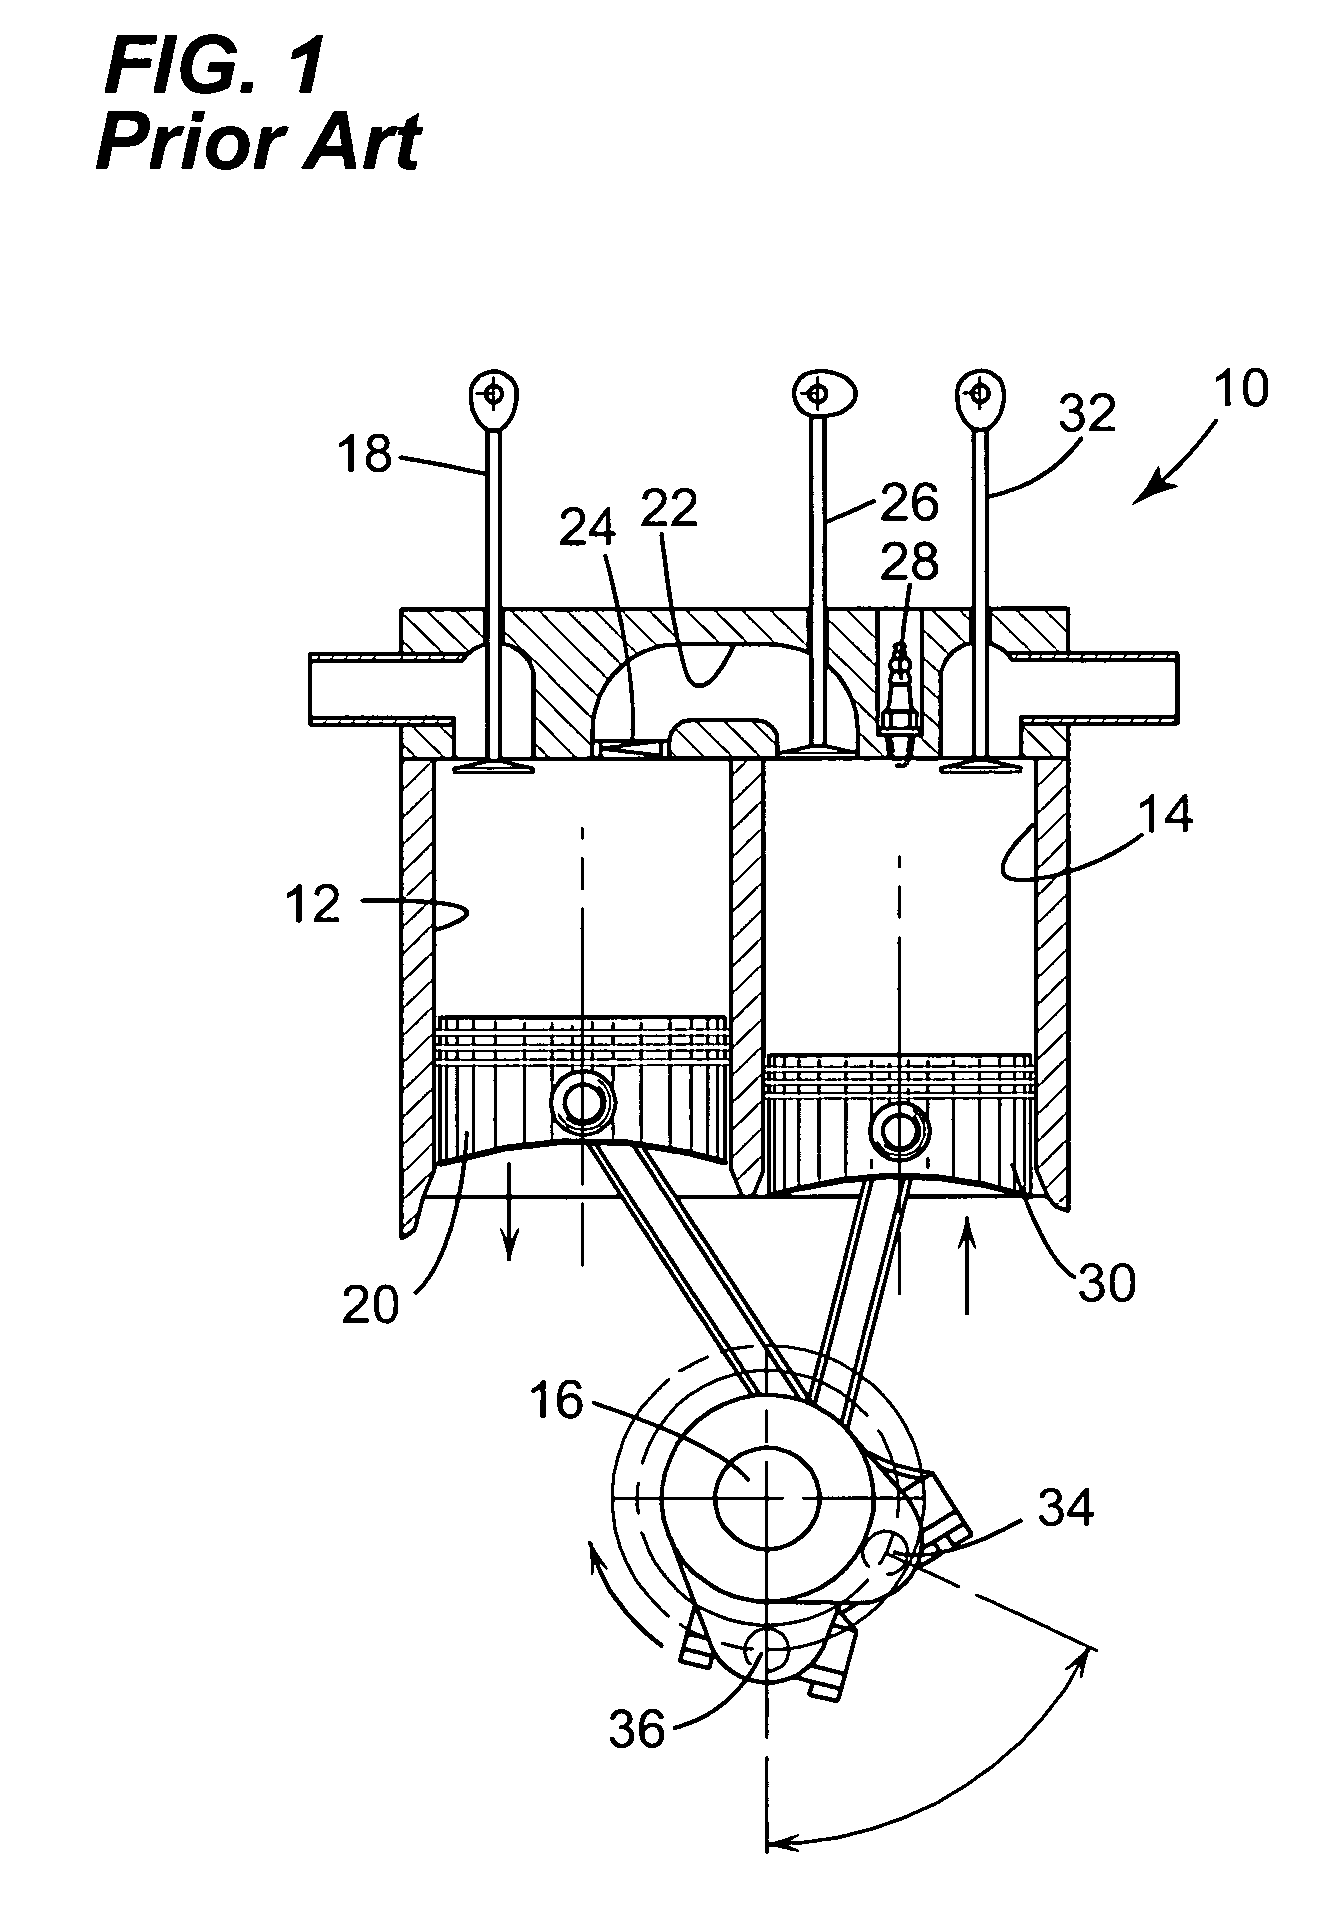 Split-cycle engine with early crossover compression valve opening